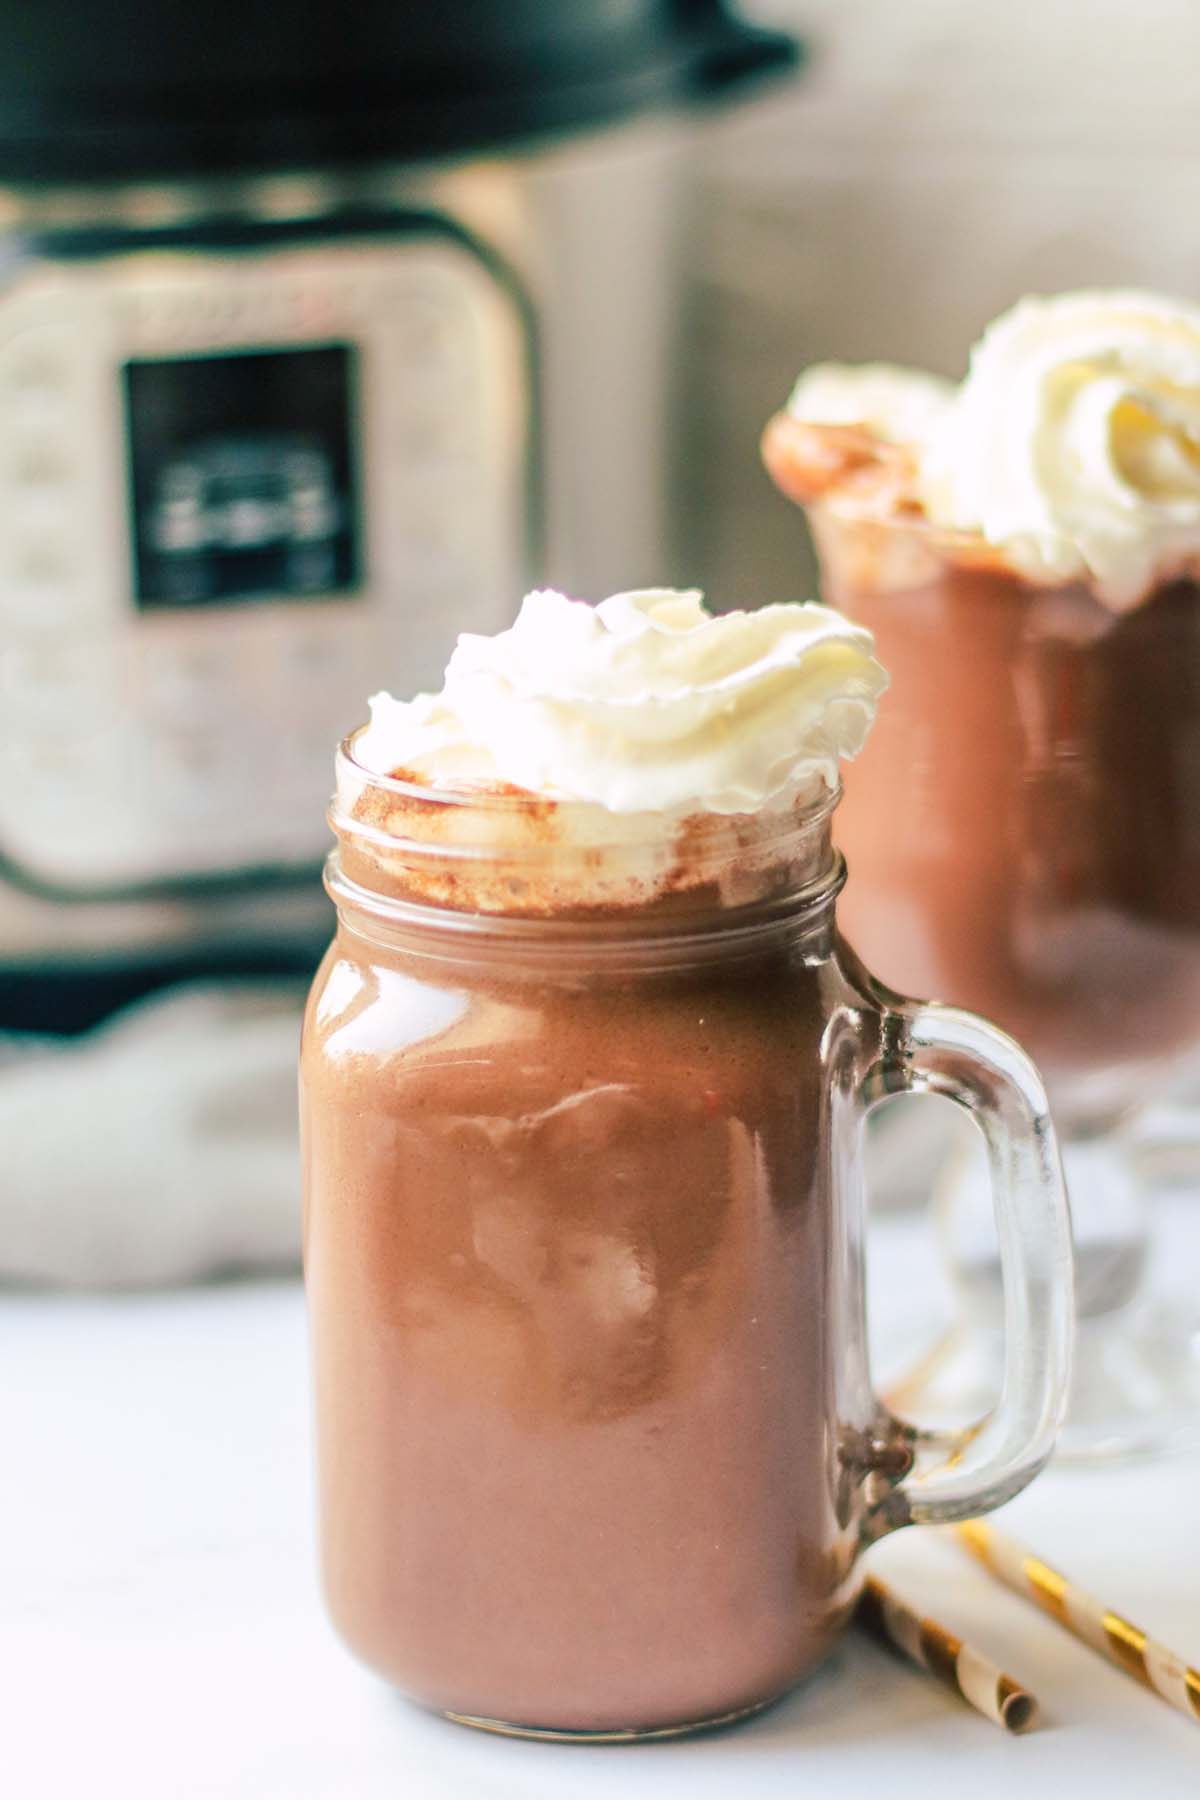 Hot chocolate topped with whipped cream.